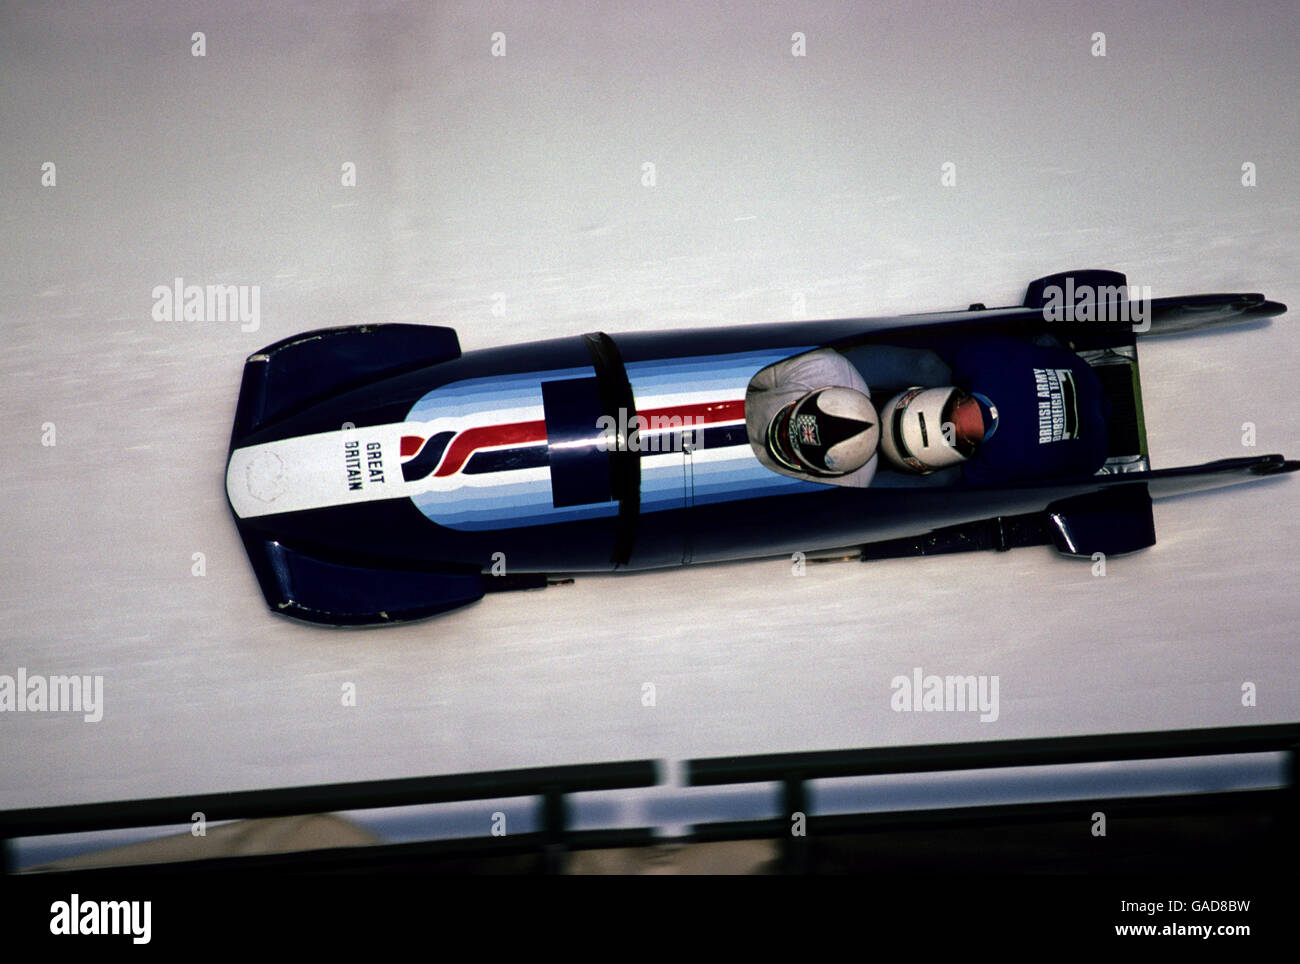 Winter Olympic Games 1988 - Calgary. Great Britain's Two Man Bobsleigh Team. Stock Photo